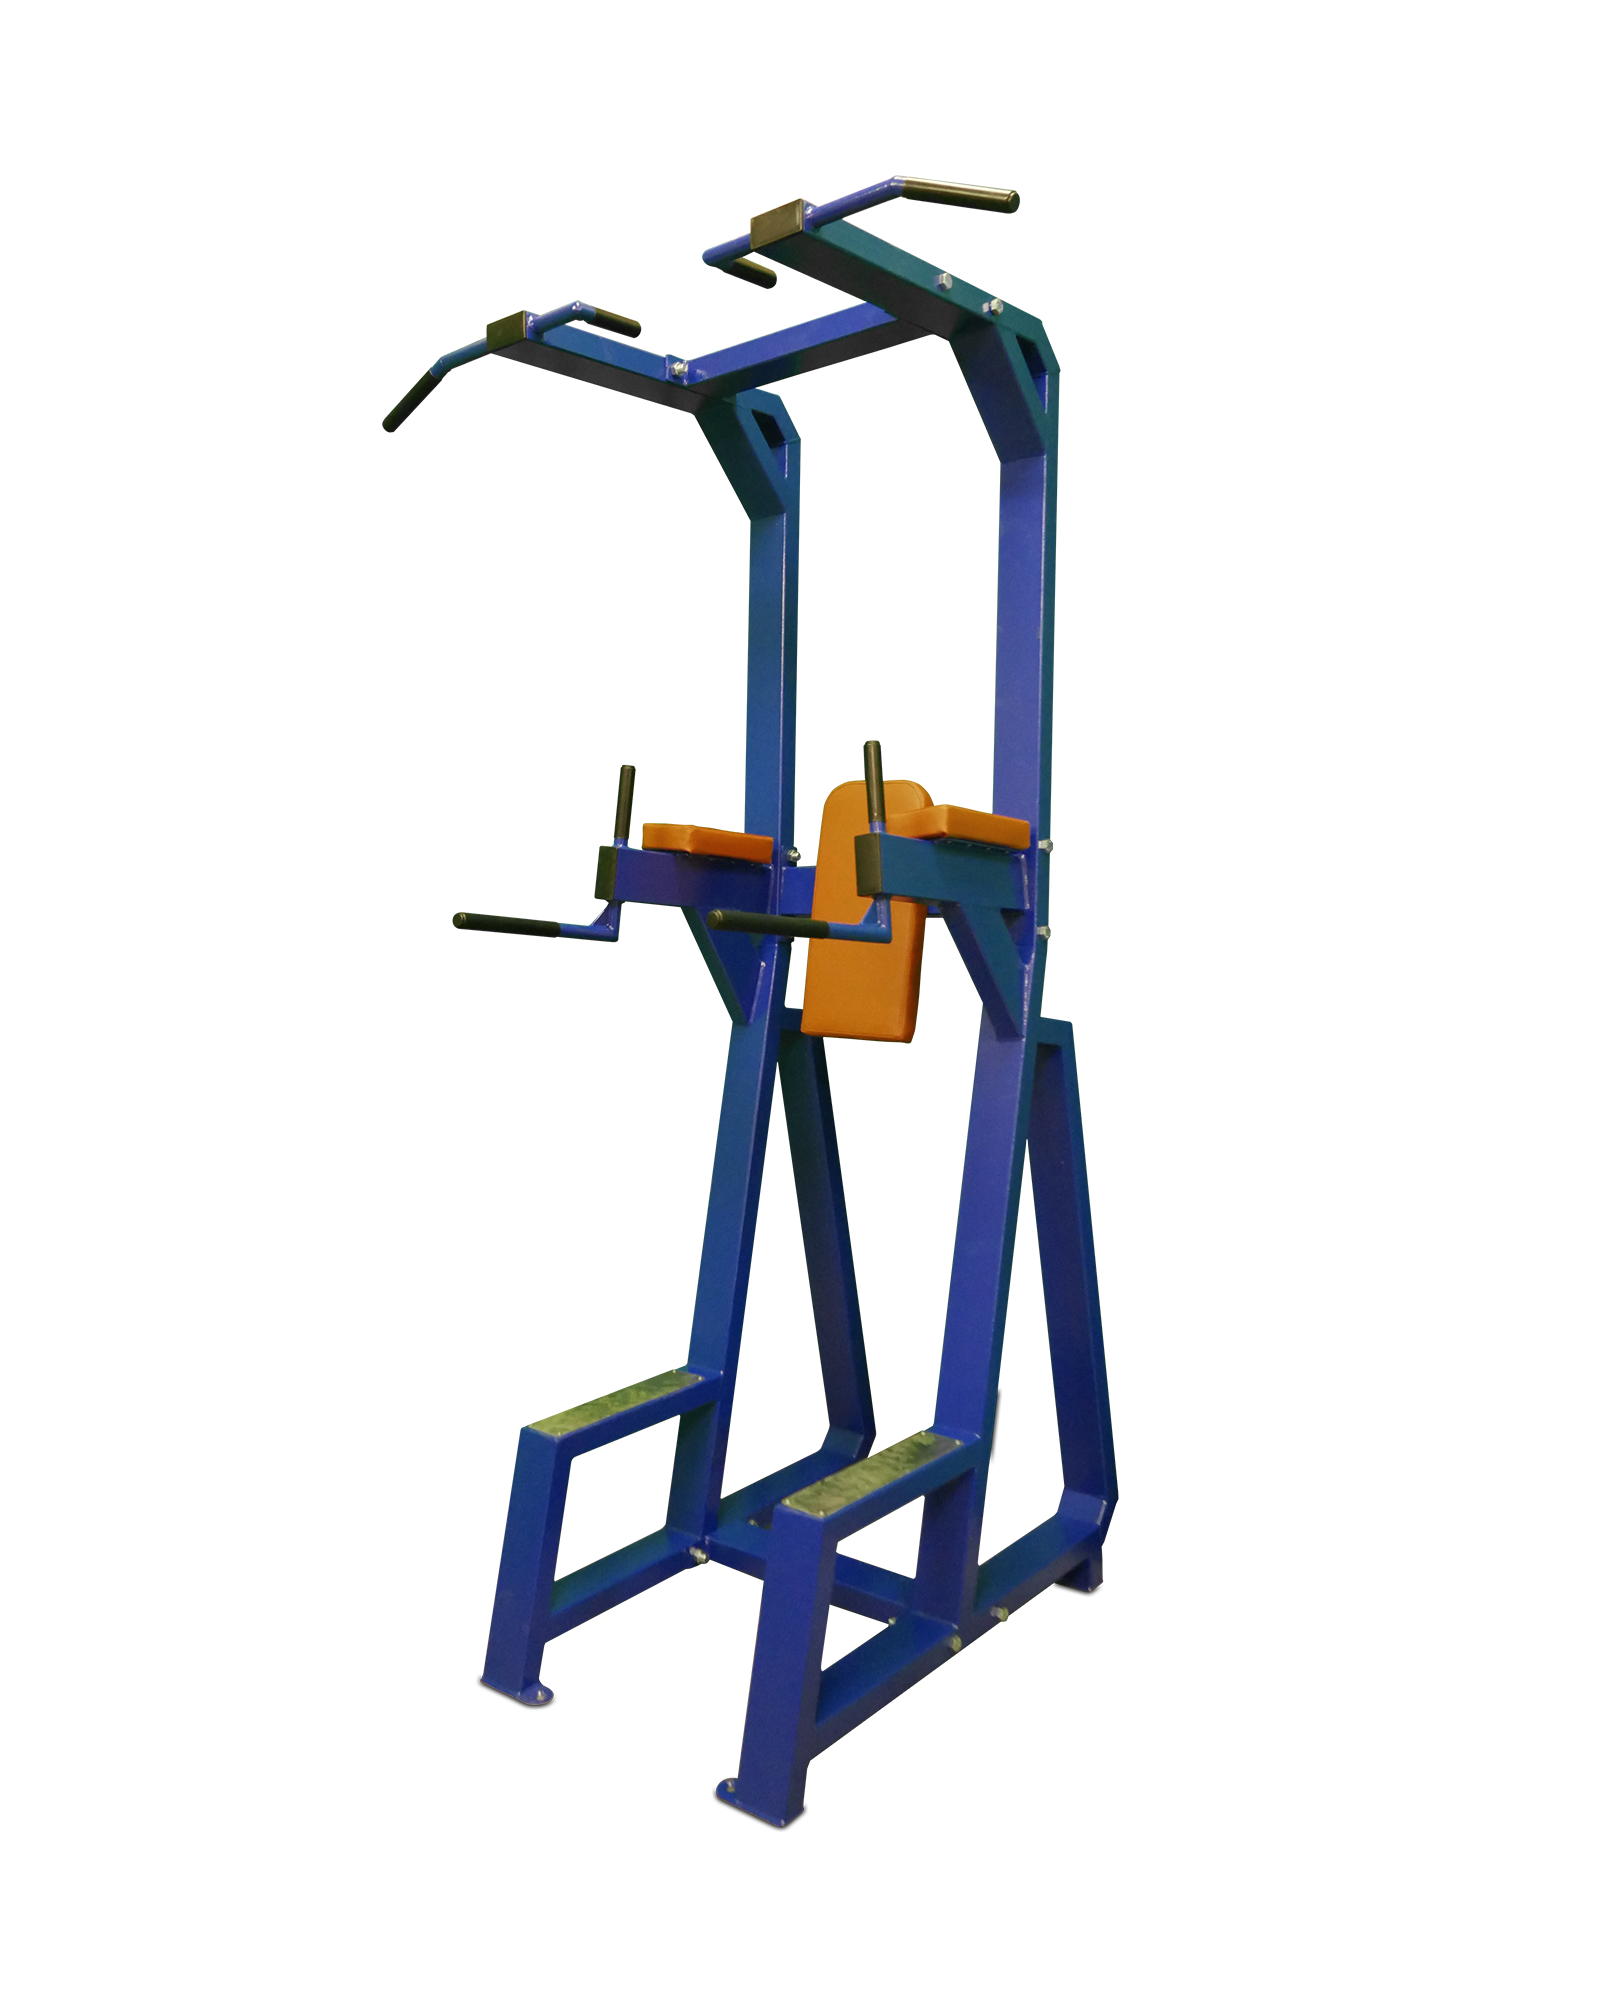 Power Tower -  - Professional Gym Equipment